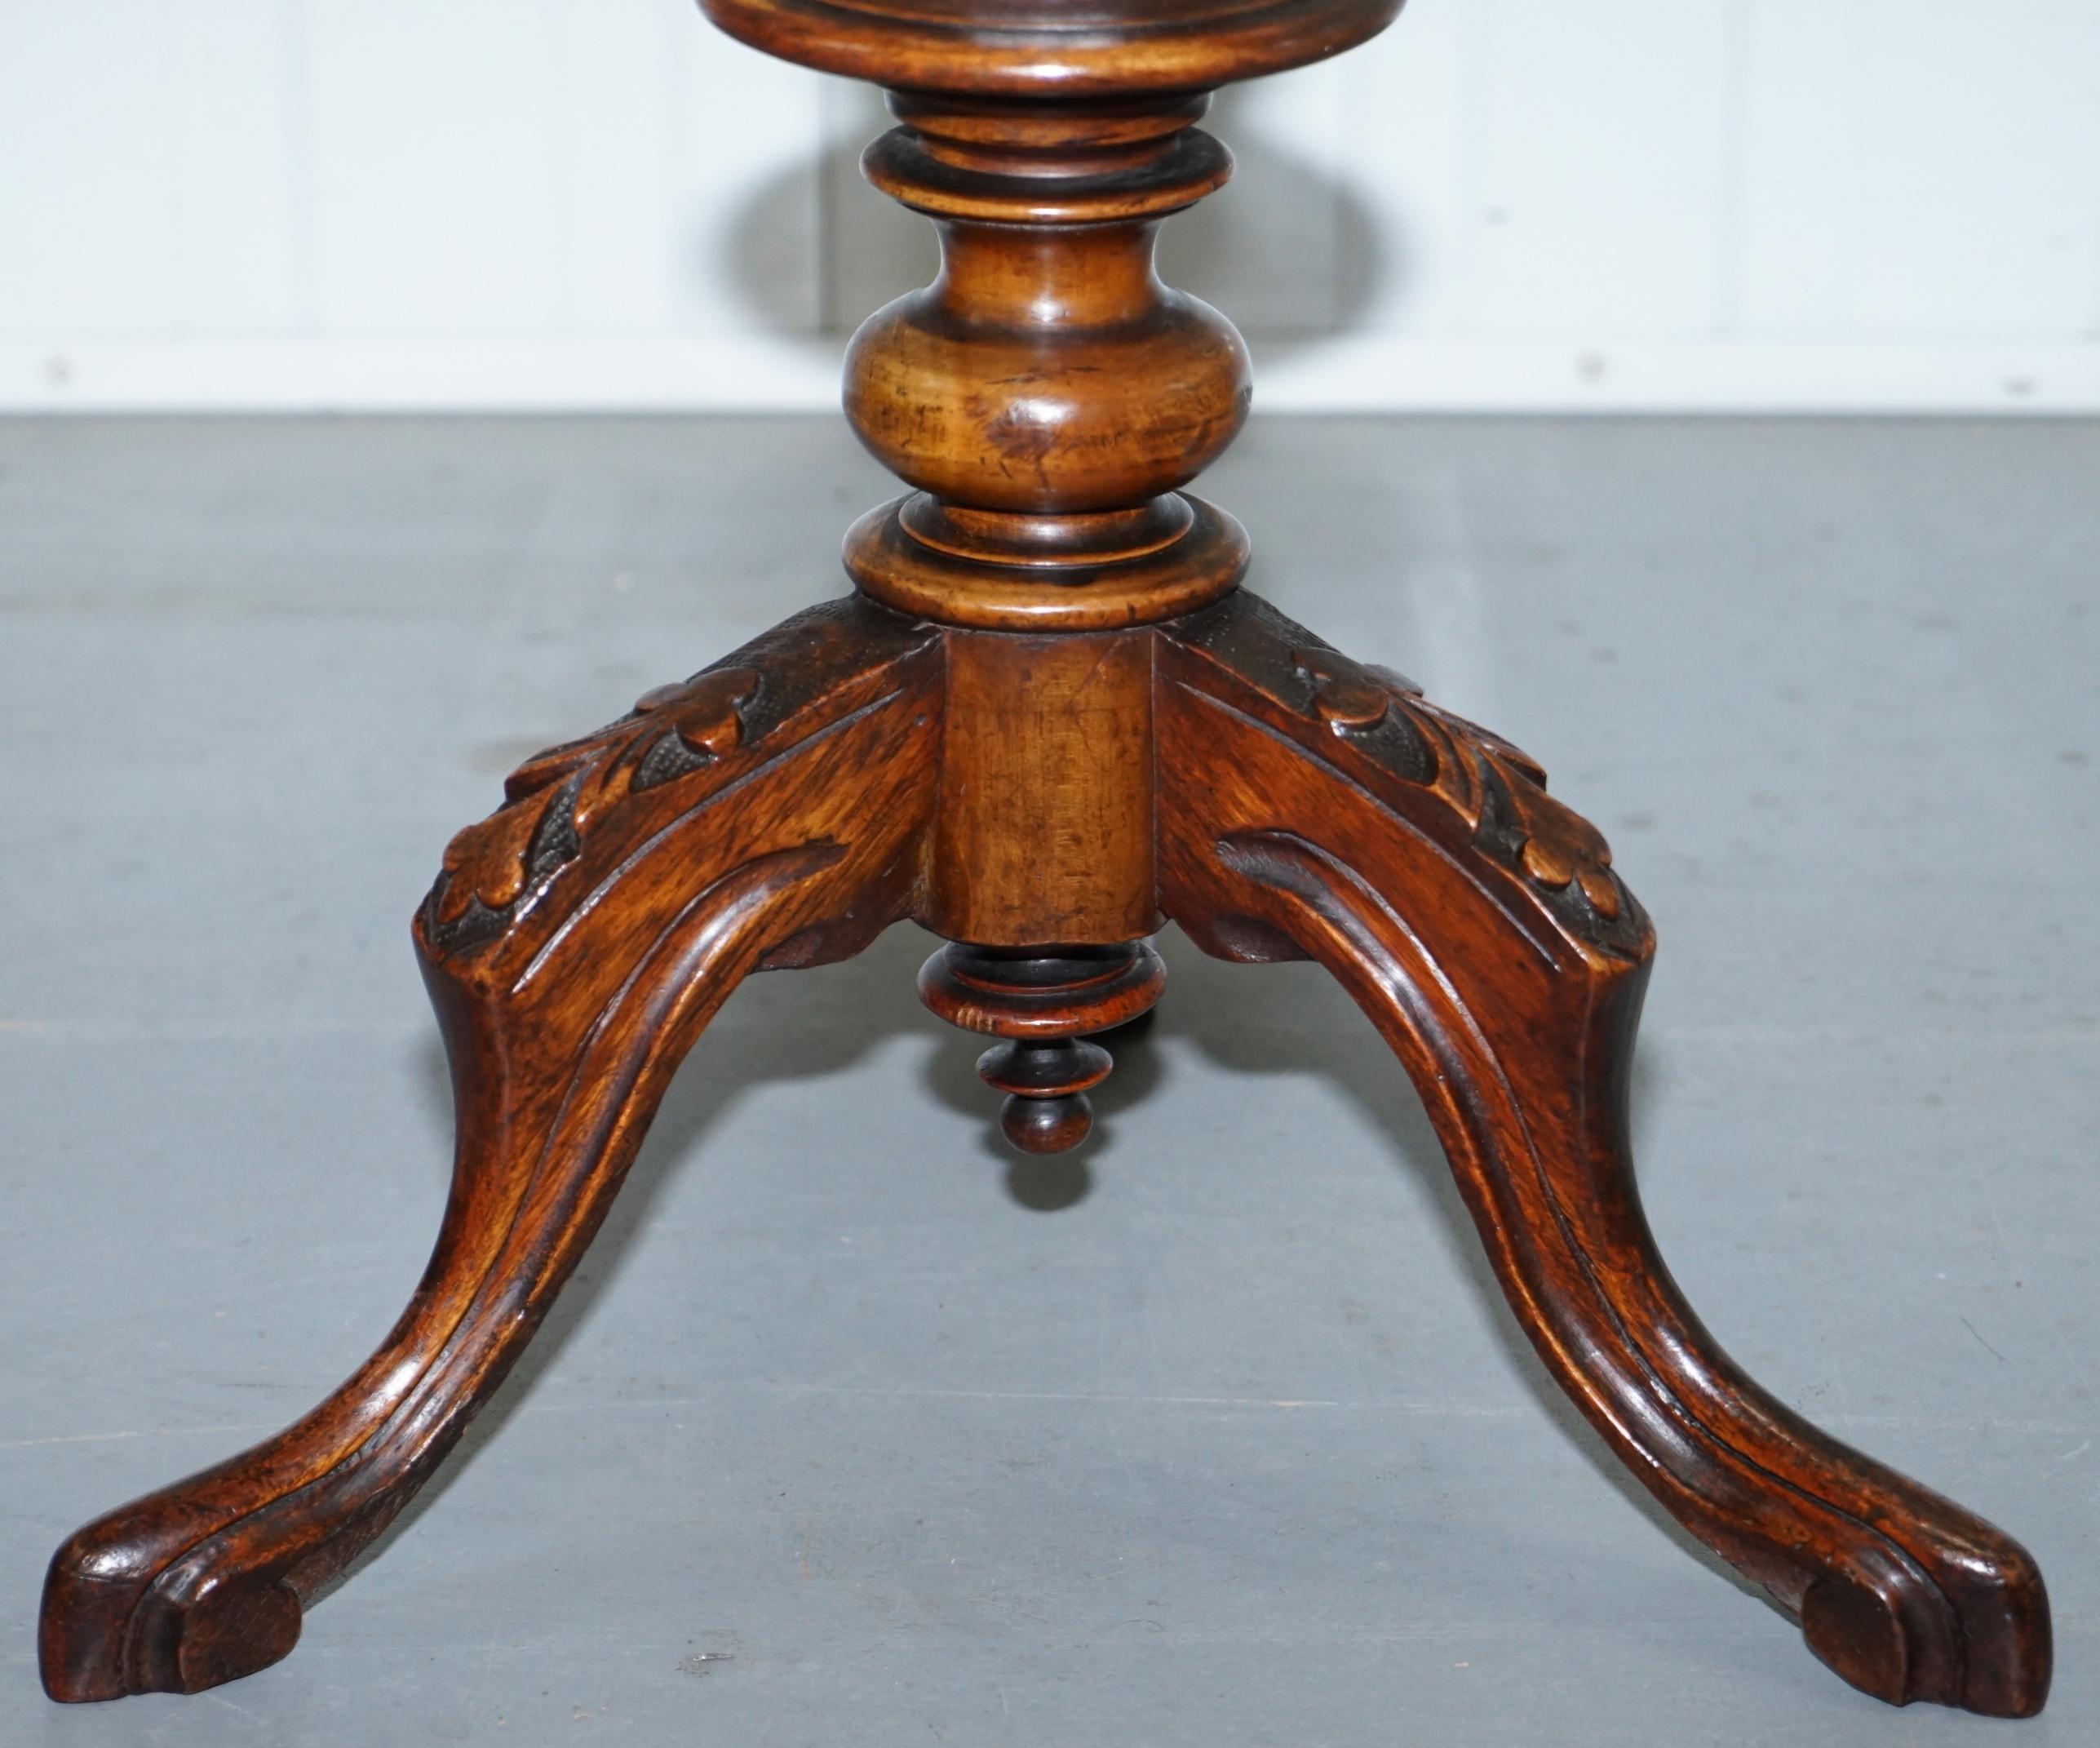 Stunning Burr Walnut Victorian Sewing or Work Box Great as Side Lamp End Table 14